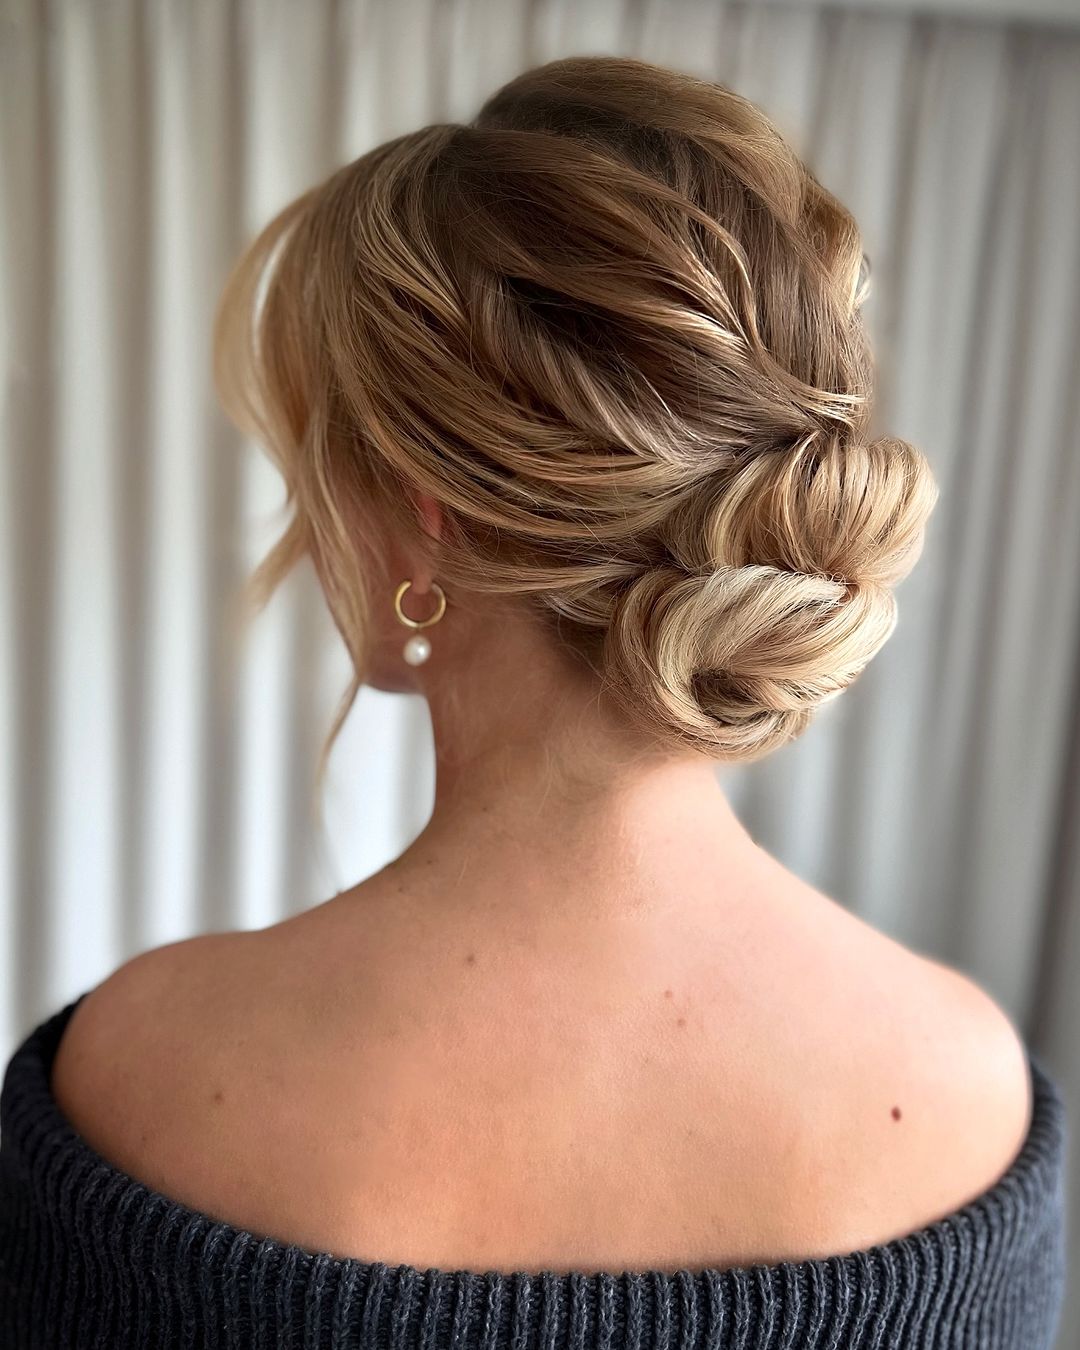 textured and chic updo